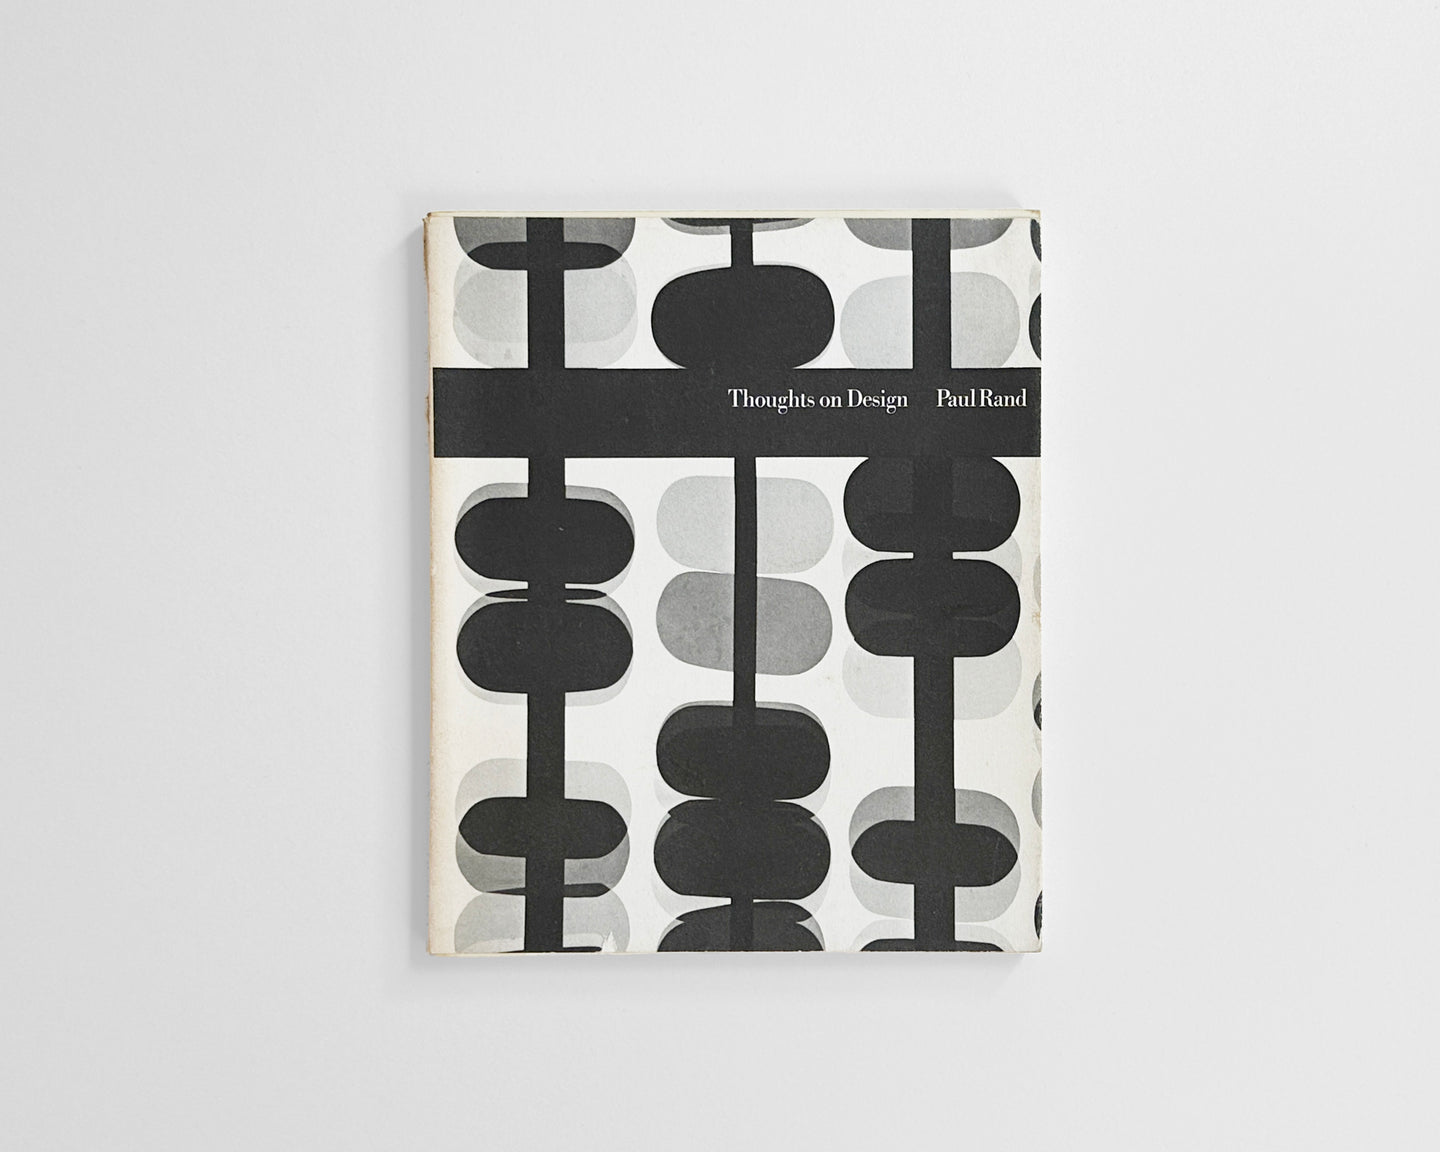 Thoughts on Design by Paul Rand — Softcover 3rd Edition, 1970